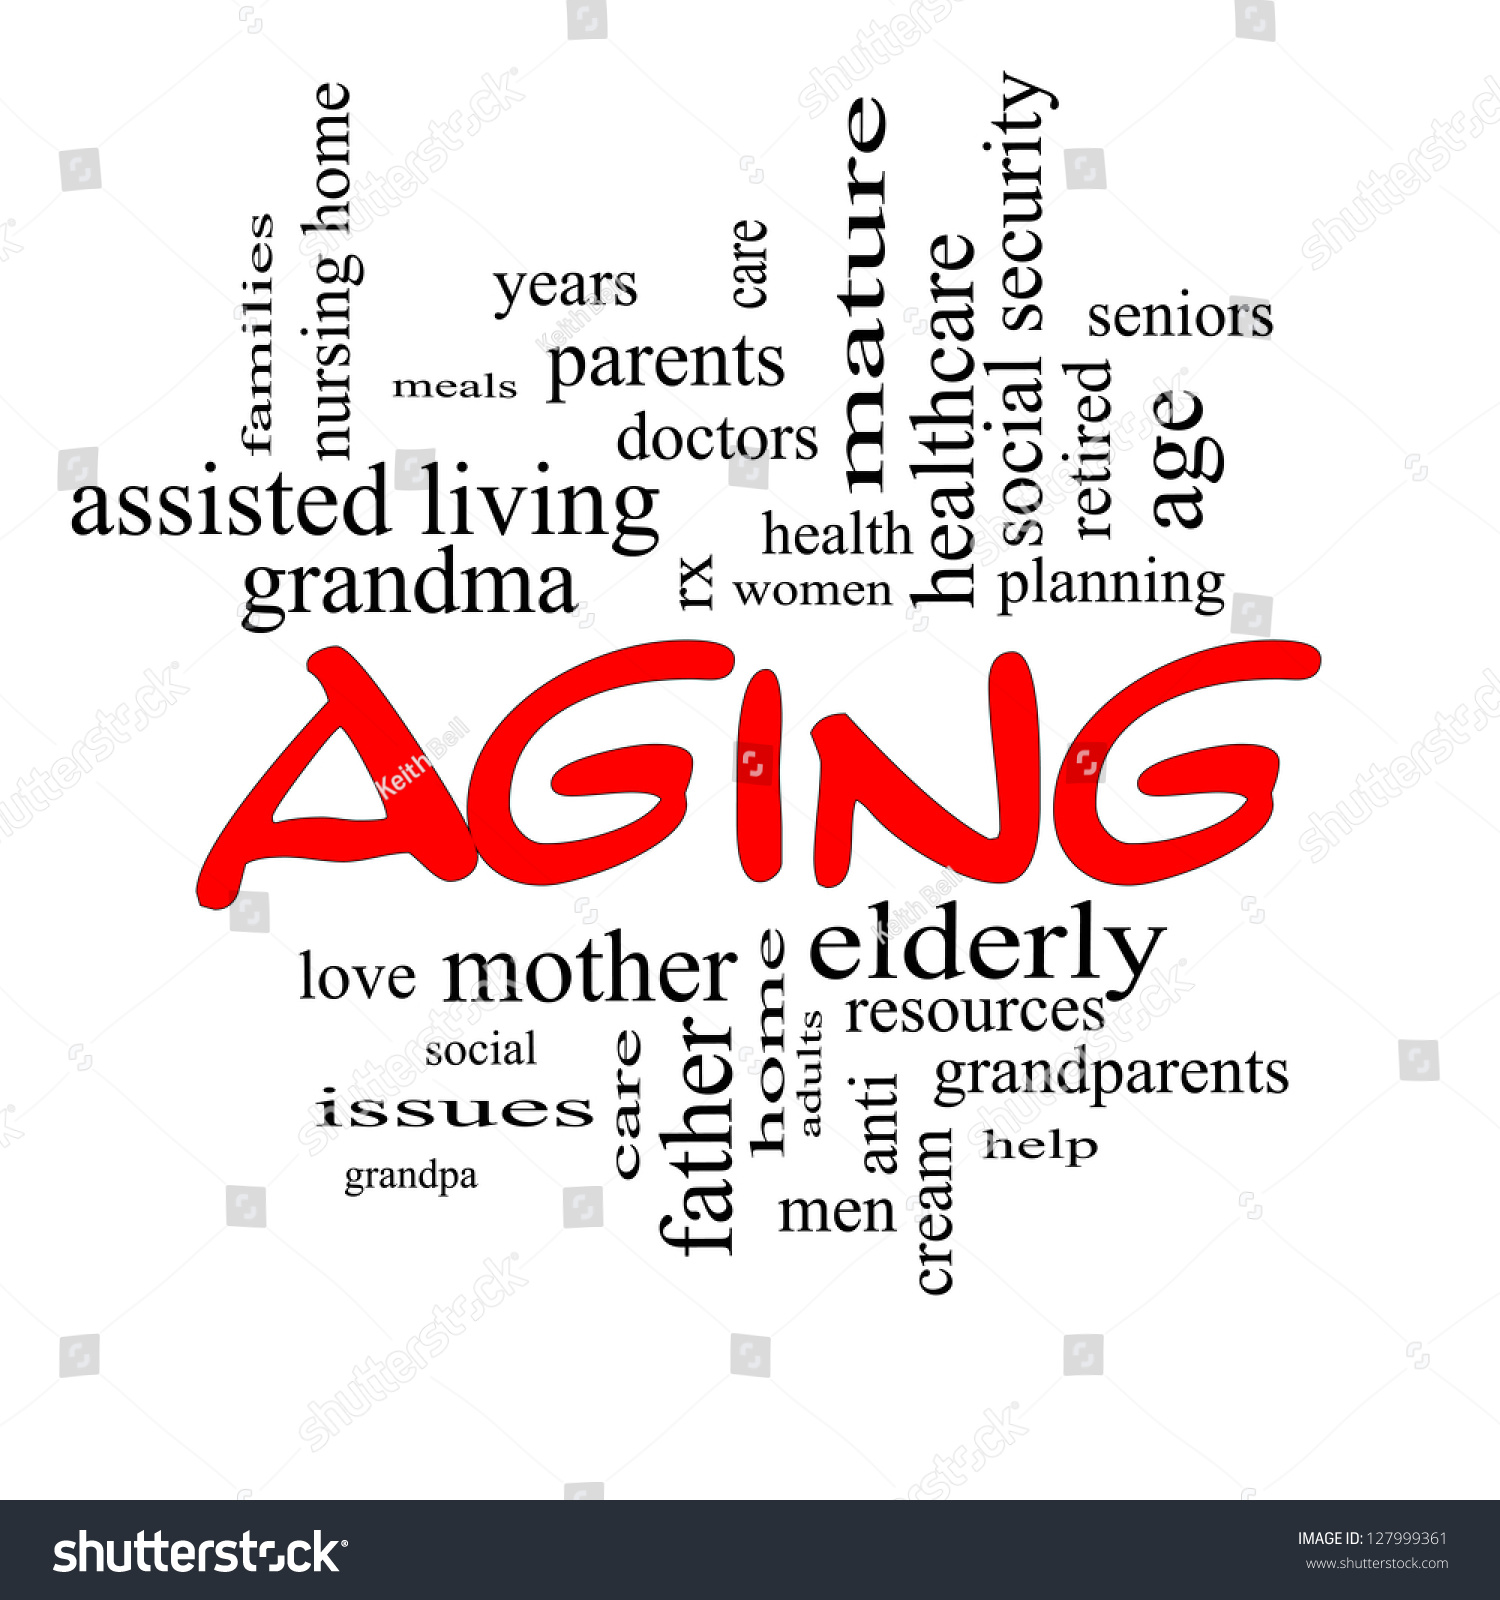 social issues aging